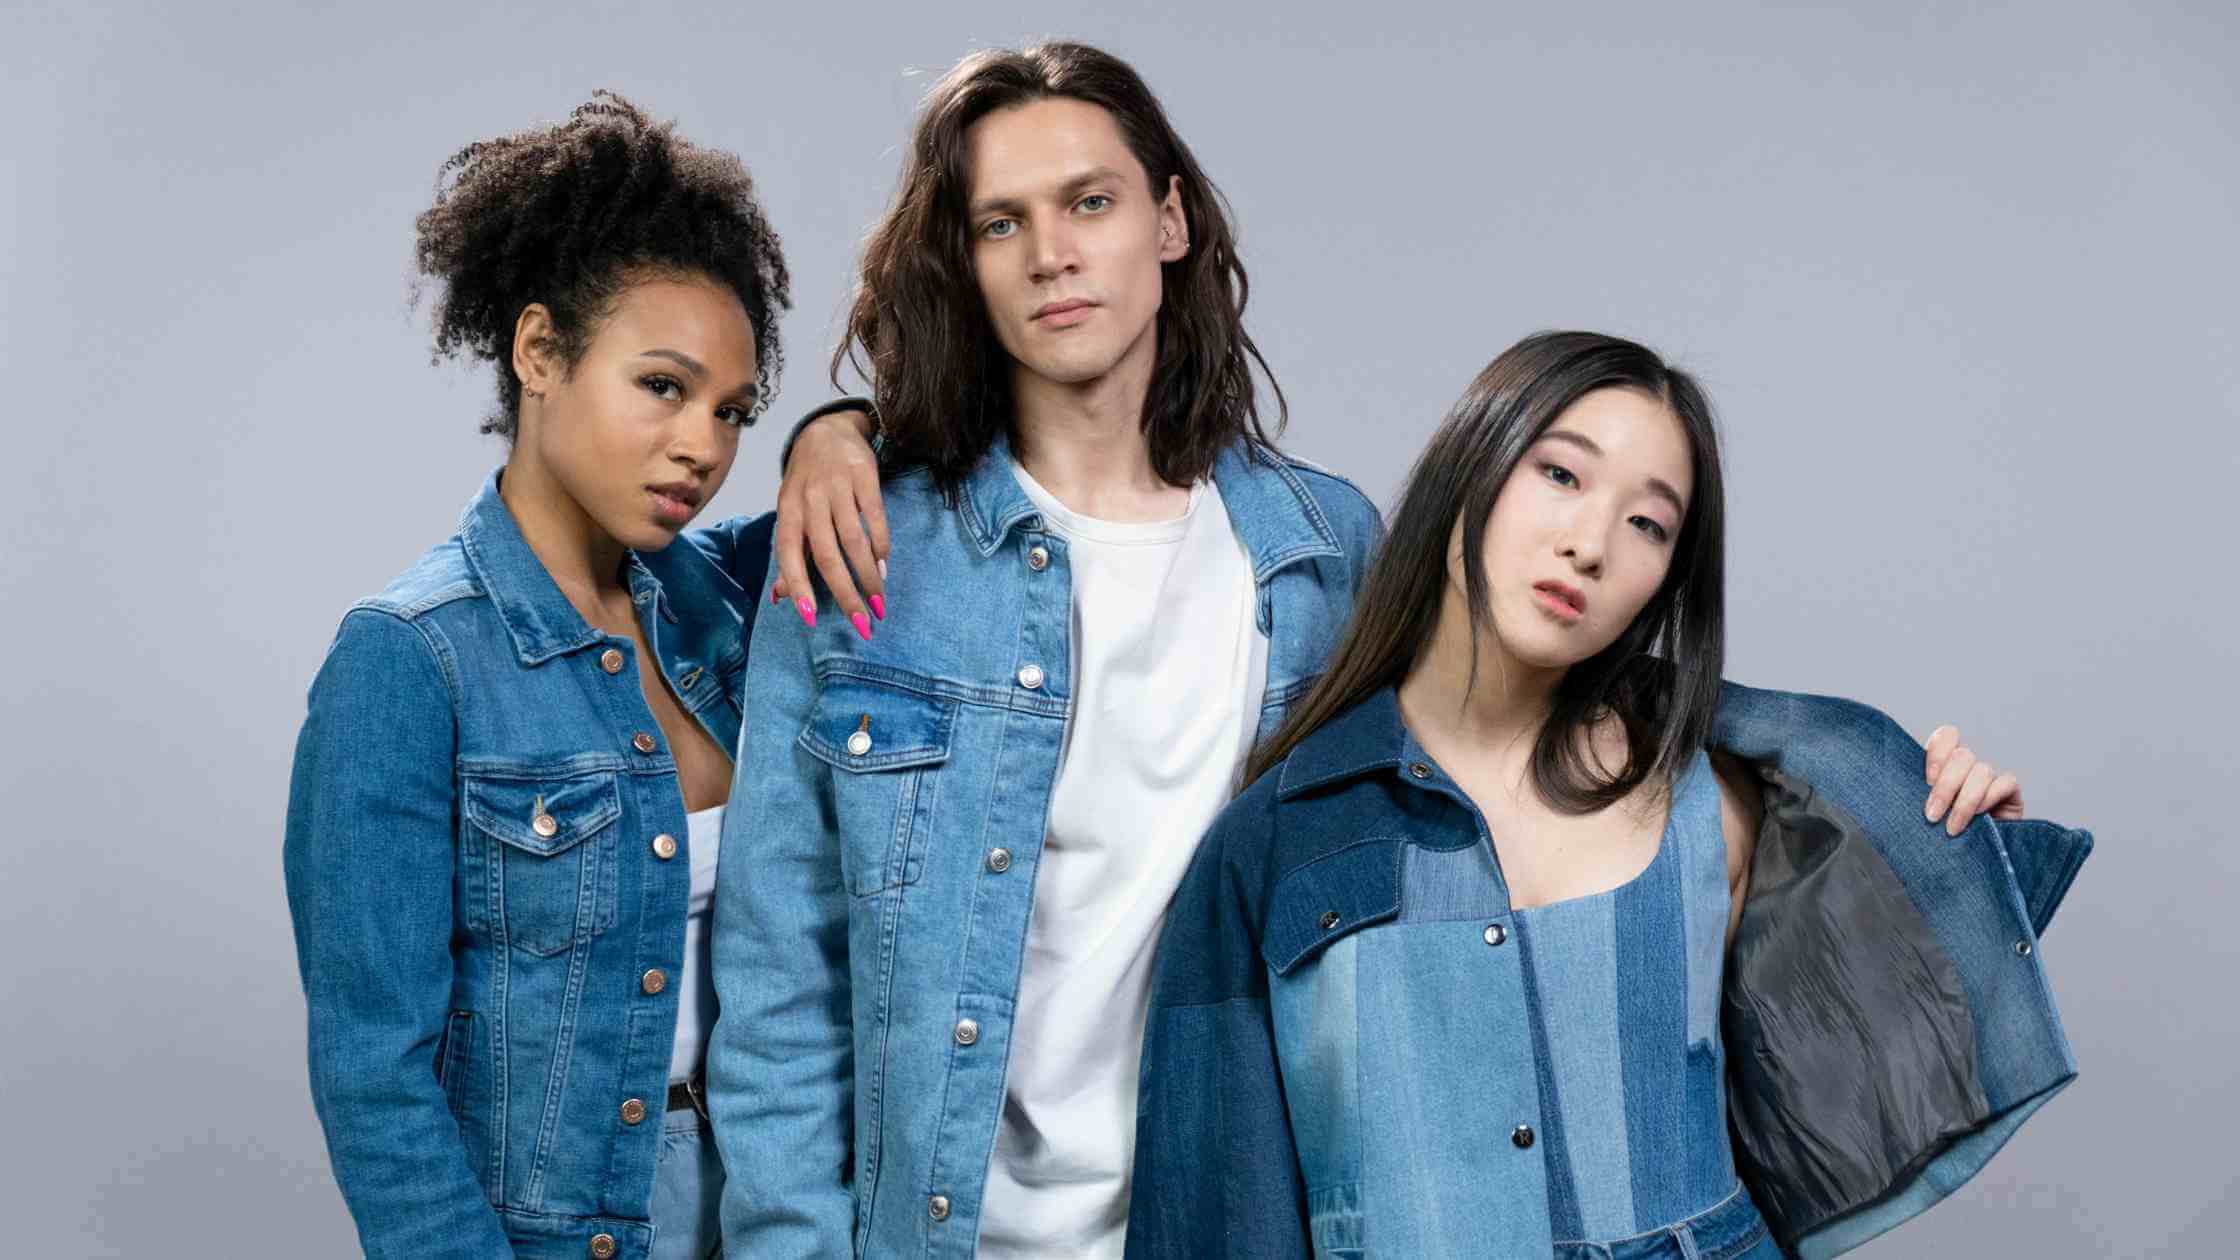 in a group picture of two women and man; they are wearing different types of denim jacket